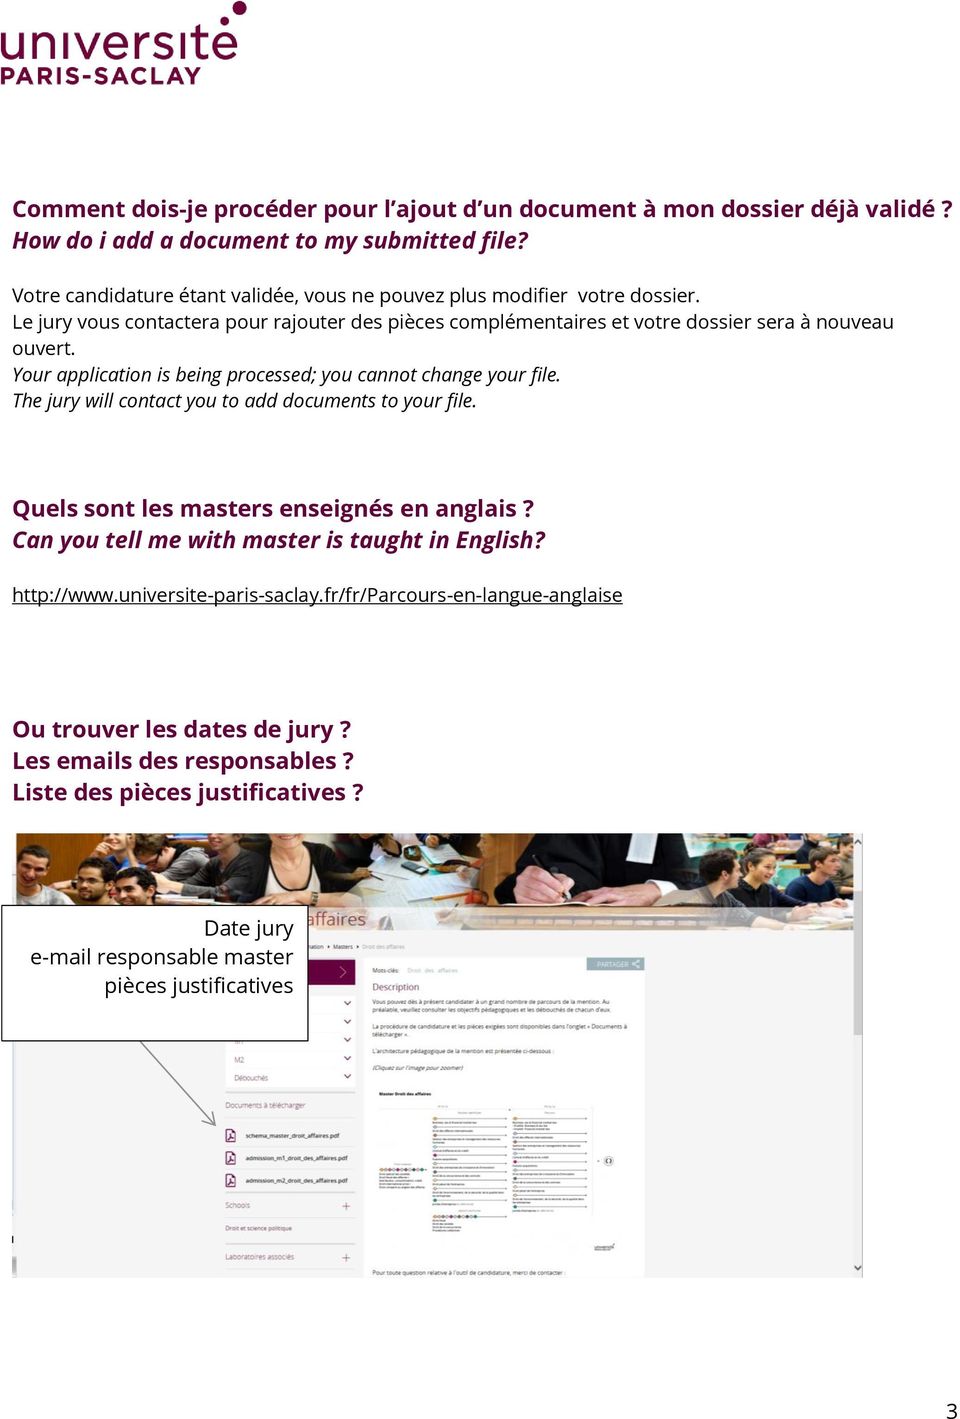 Your application is being processed; you cannot change your file. The jury will contact you to add documents to your file. Quels sont les masters enseignés en anglais?